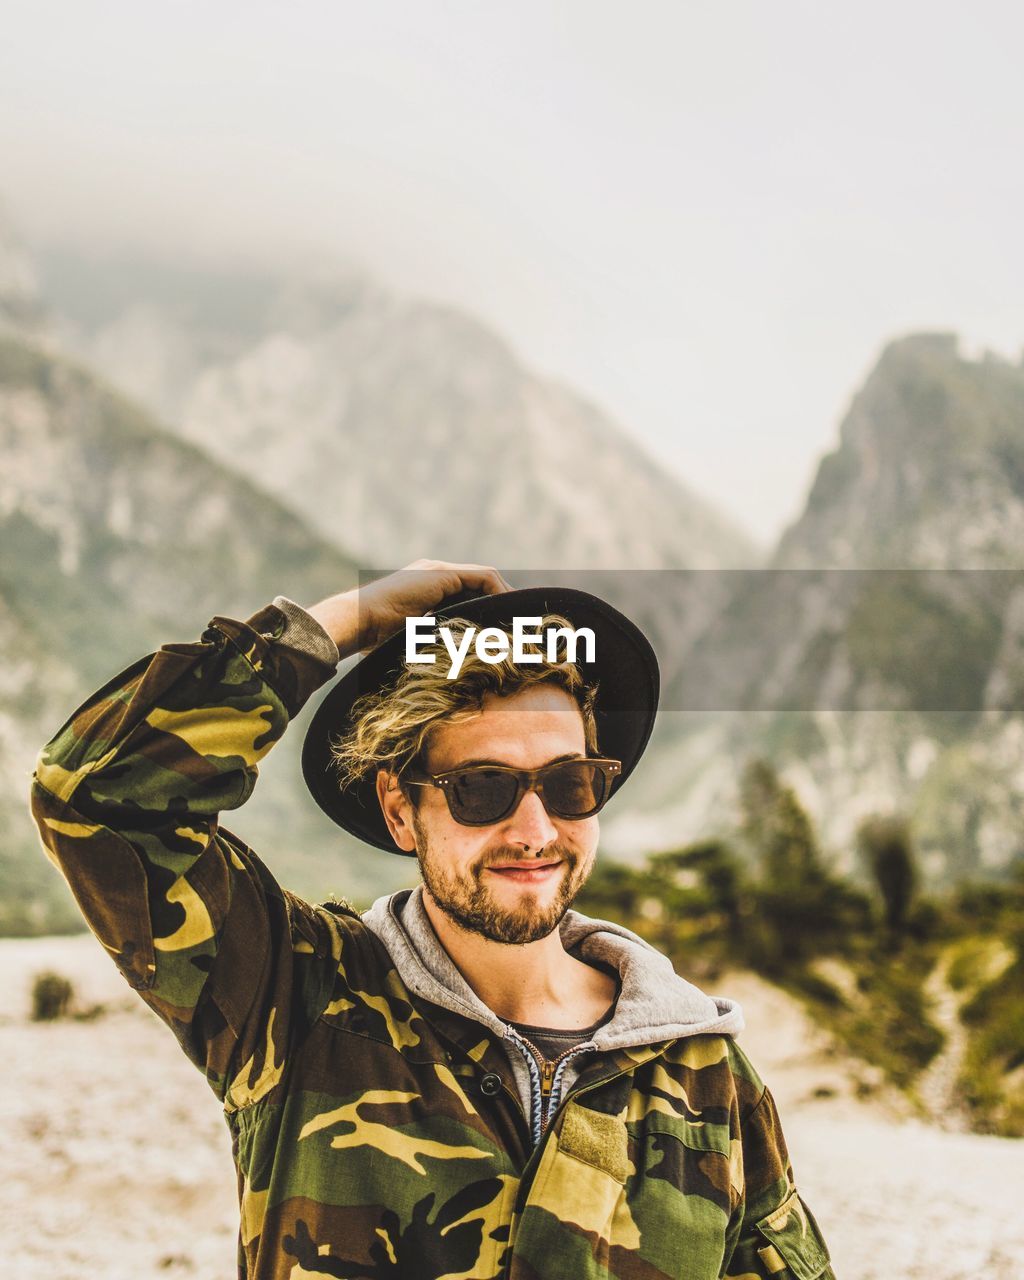 Portrait of man wearing sunglasses against mountains